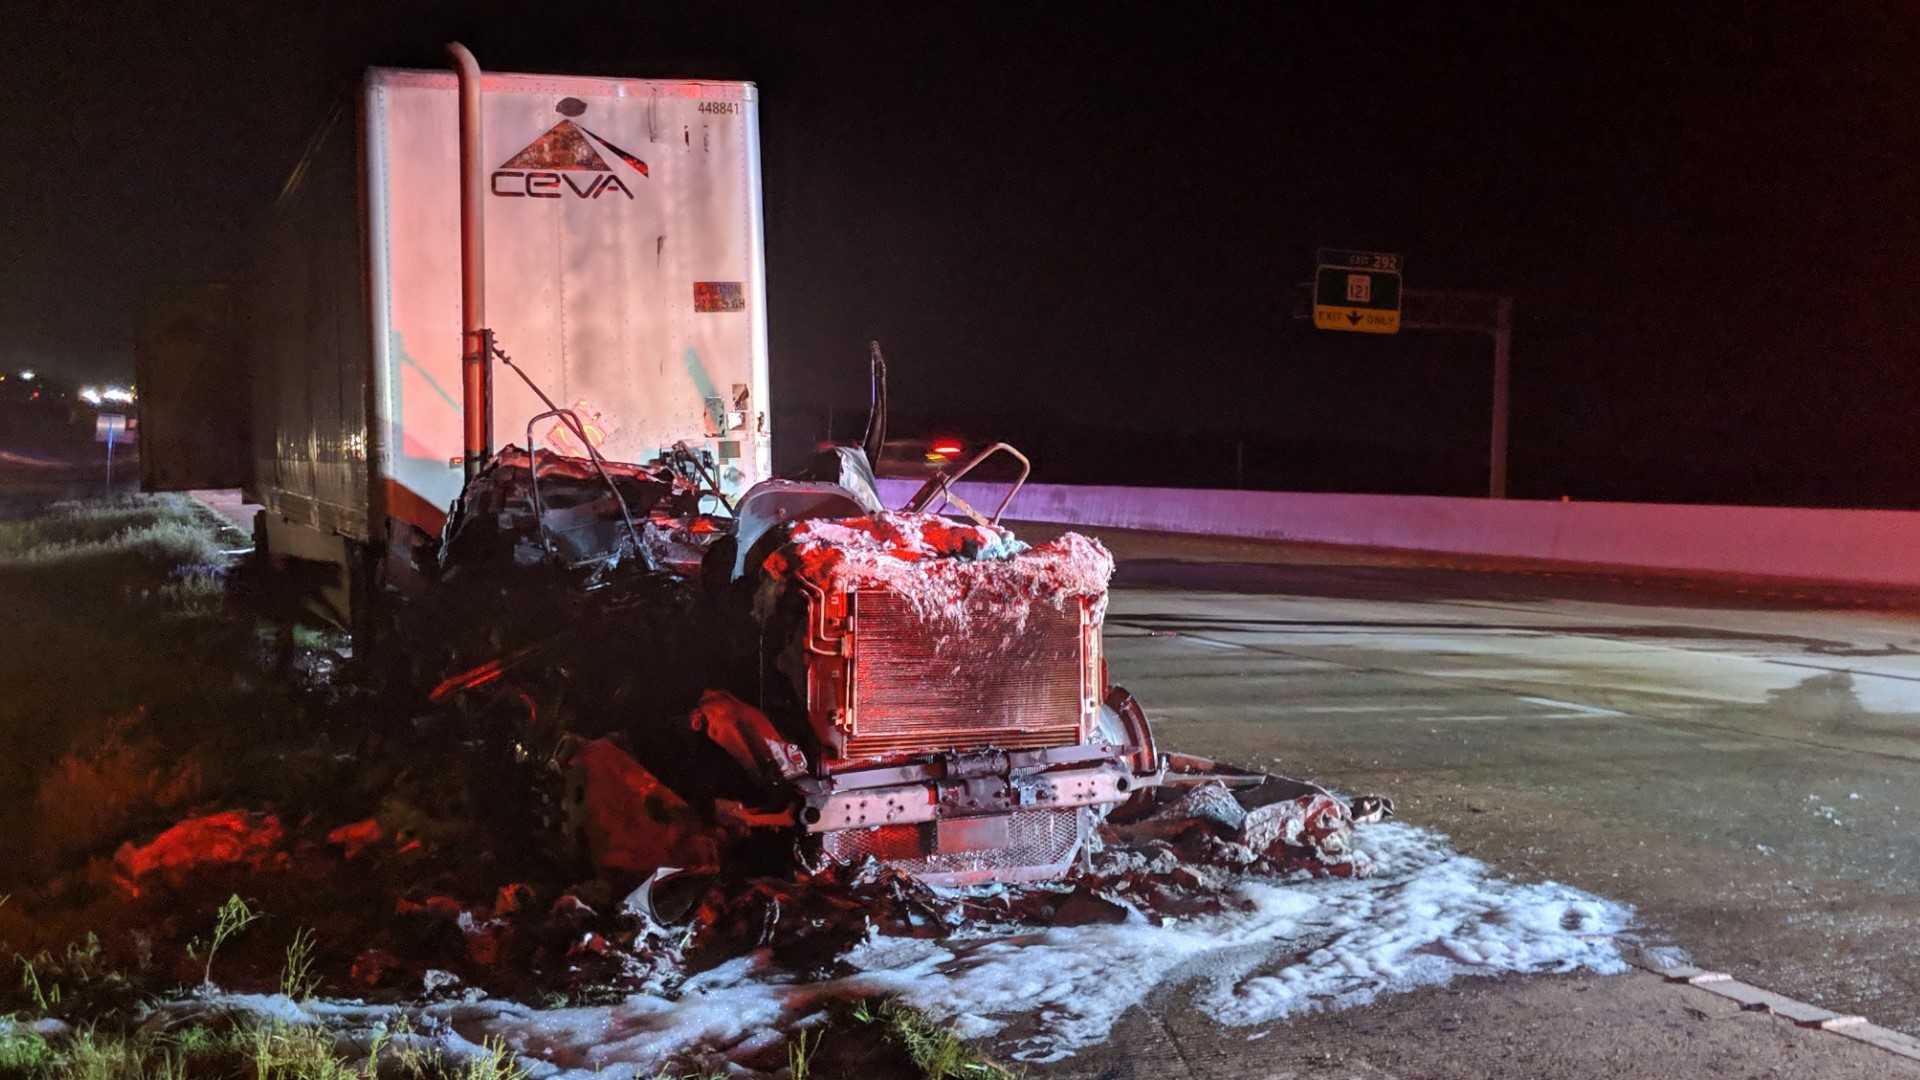 The driver of a semi-trailer was hospitalized after the vehicle caught fire on Southbound Interstate 35, according to fire officials. Both lanes of the interstate and the frontage road near Exit 289A reopened around 4 a.m. Wednesday.